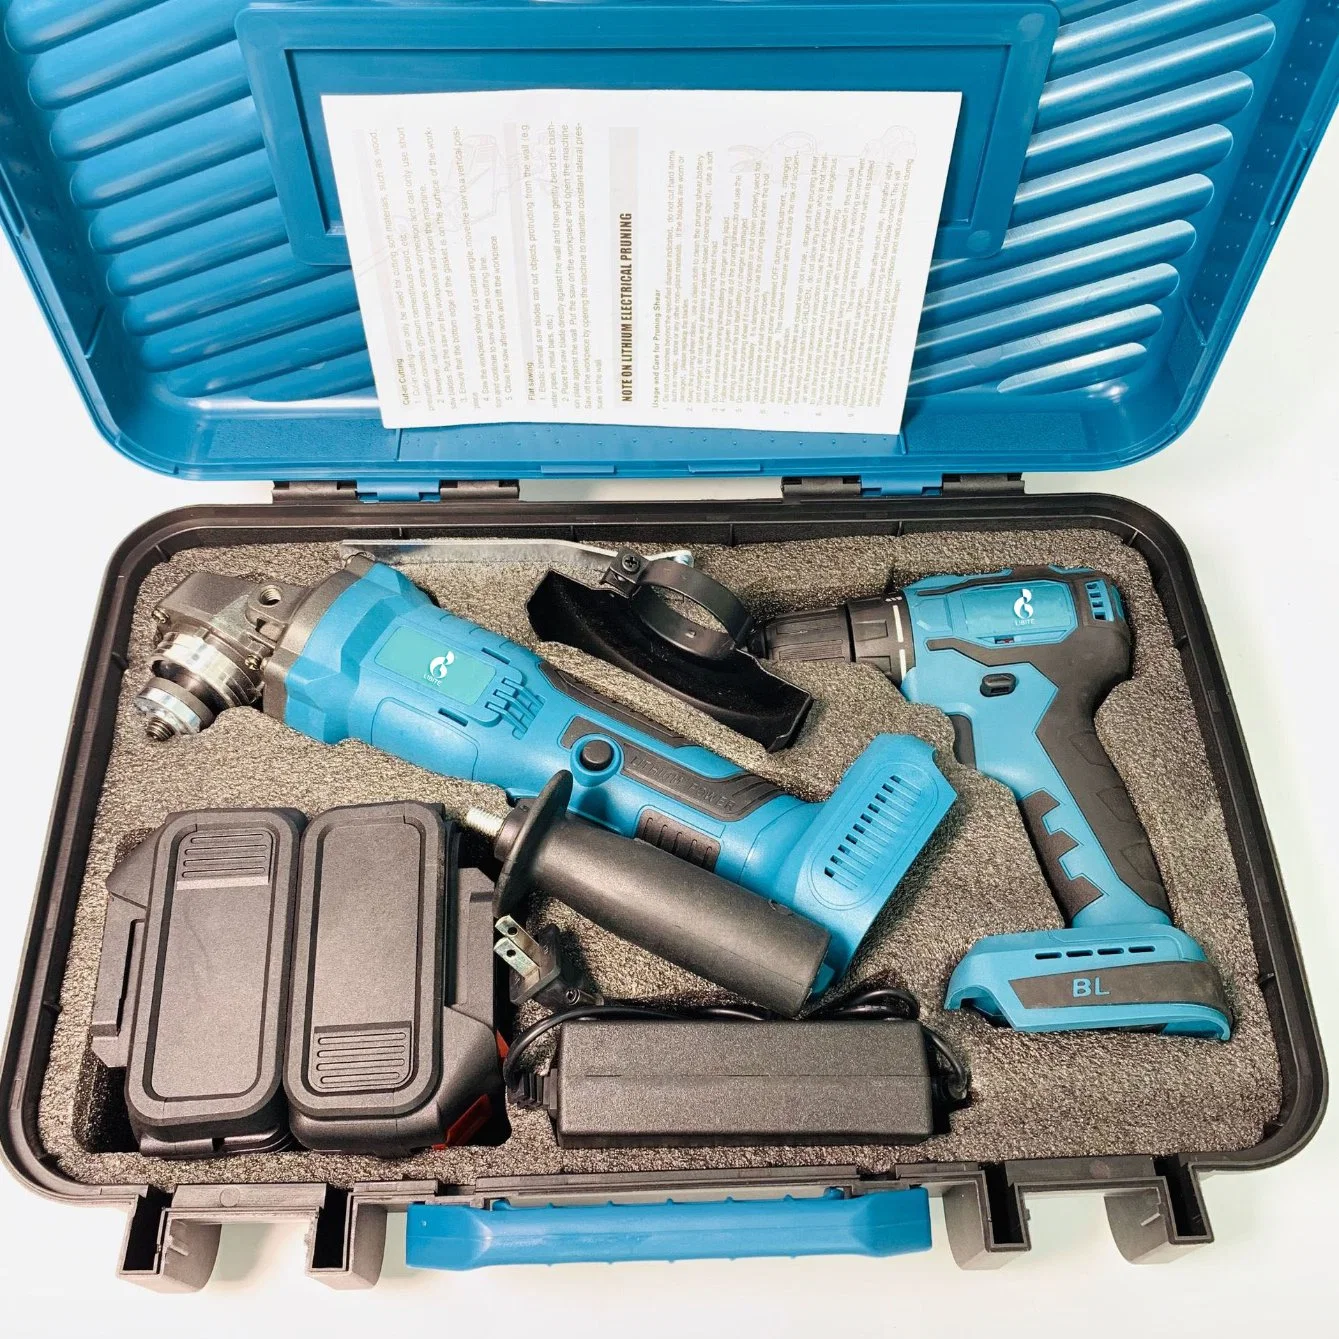 Professional-Grade Cordless Power Tool Combo Kit with Precision Angle Grinder